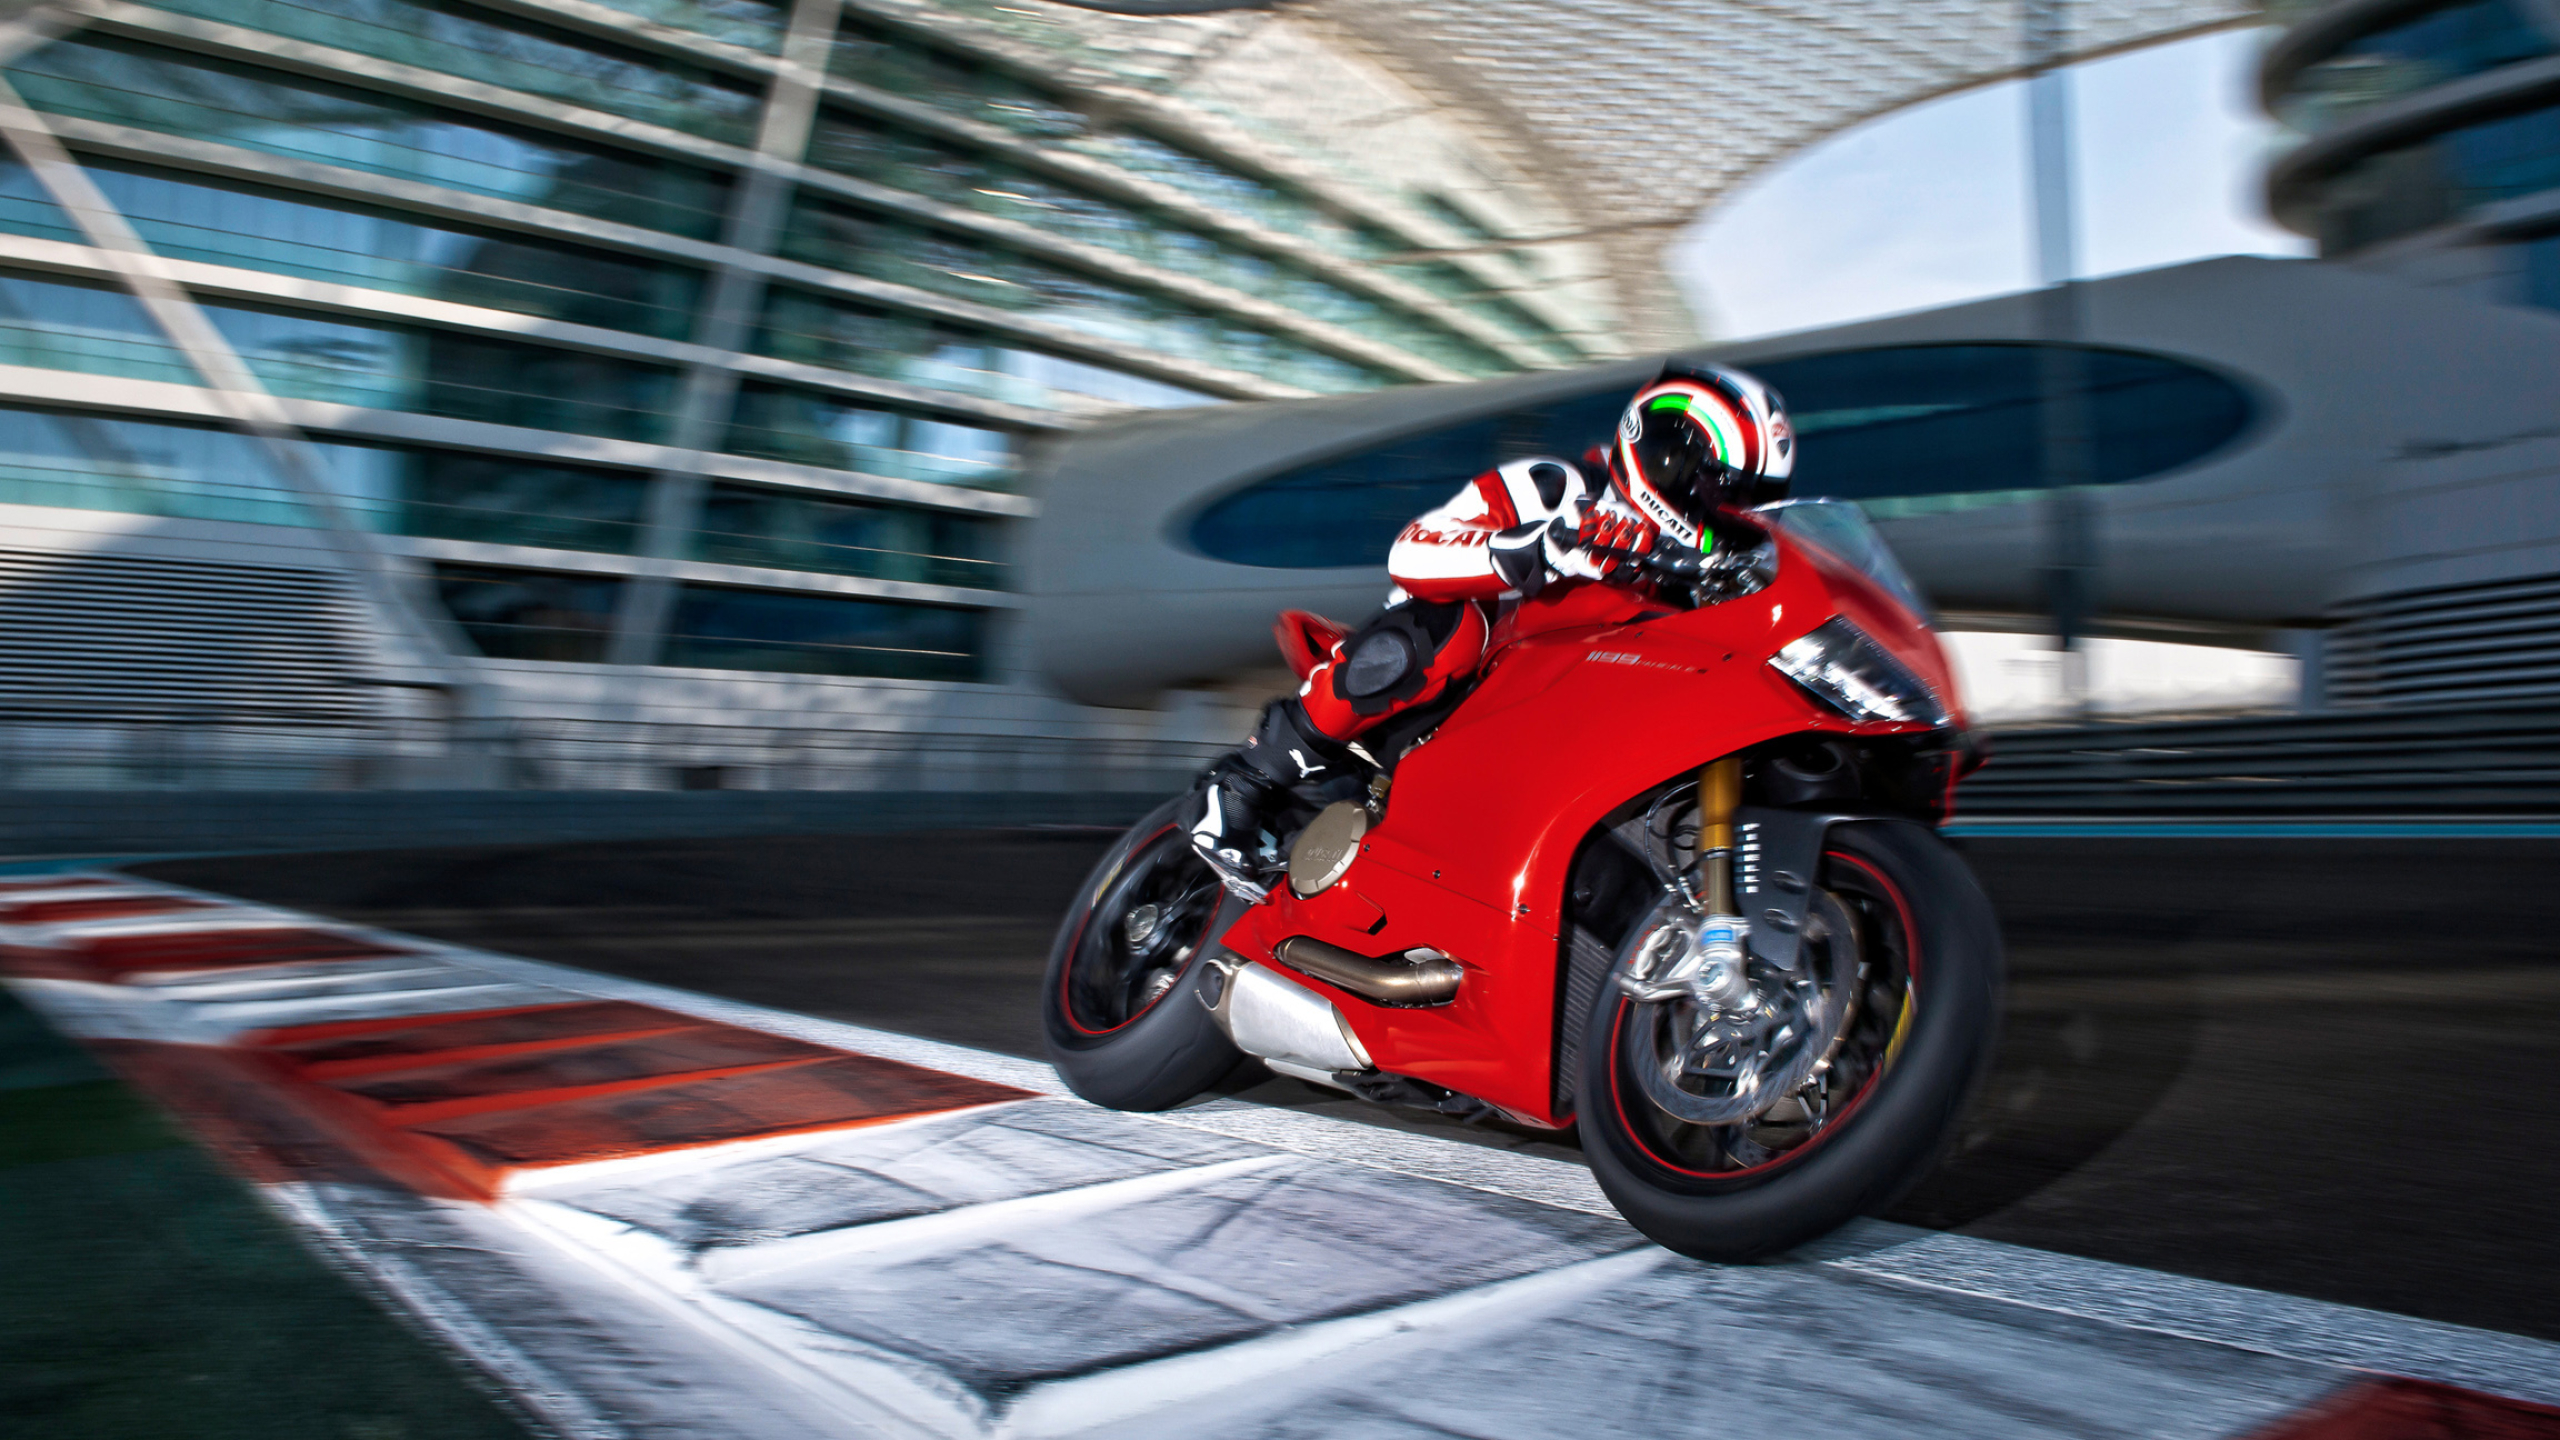 Superbike: Ducati 1199 Panigale at a circle race track, Professional moto sport, Extreme racing. 2560x1440 HD Background.